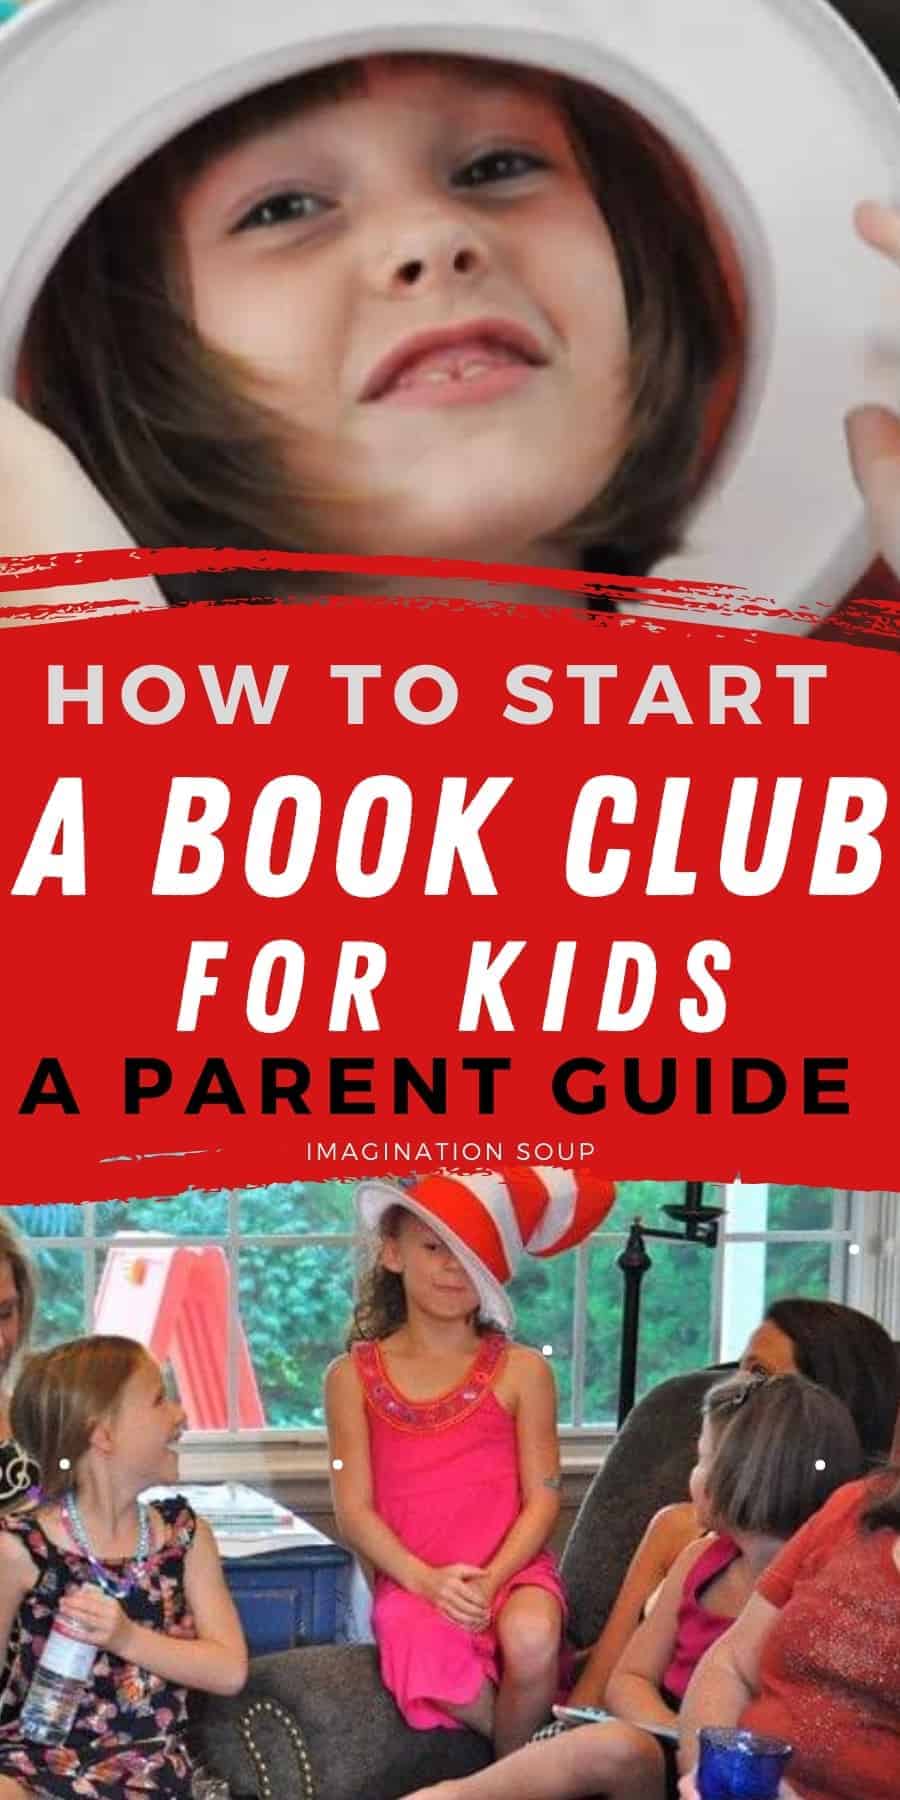 Starting a book club for kids? Get ideas for discussion, food, and even fun activities that will make your reading group so much more fun!